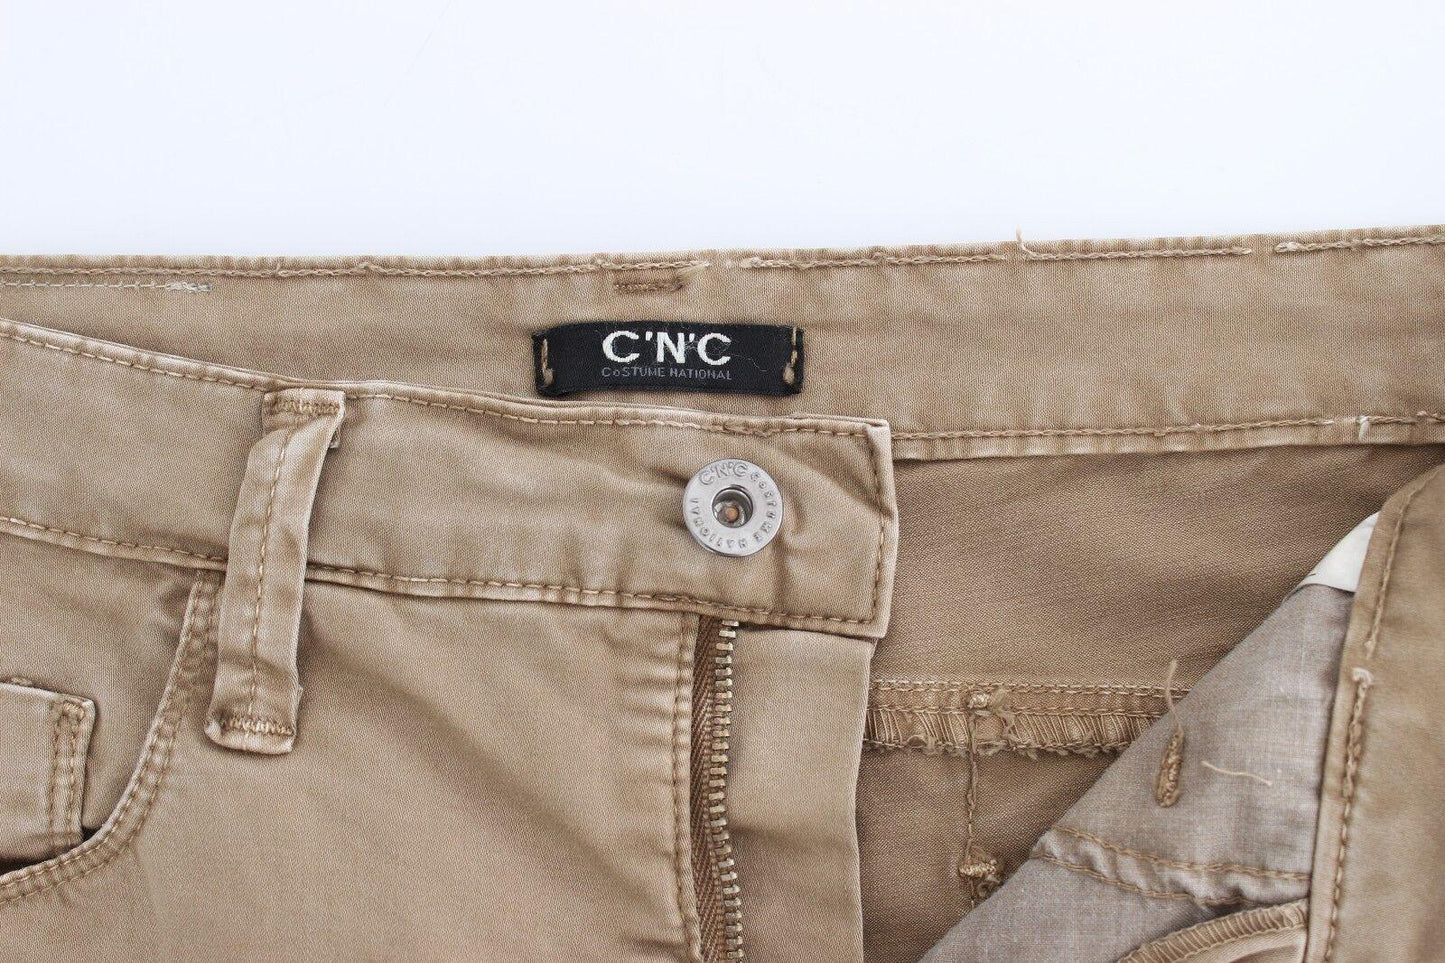 Costume National Beige Straight Leg Denim Pants Stretch Jeans - Designed by Costume National Available to Buy at a Discounted Price on Moon Behind The Hill Online Designer Discount Store